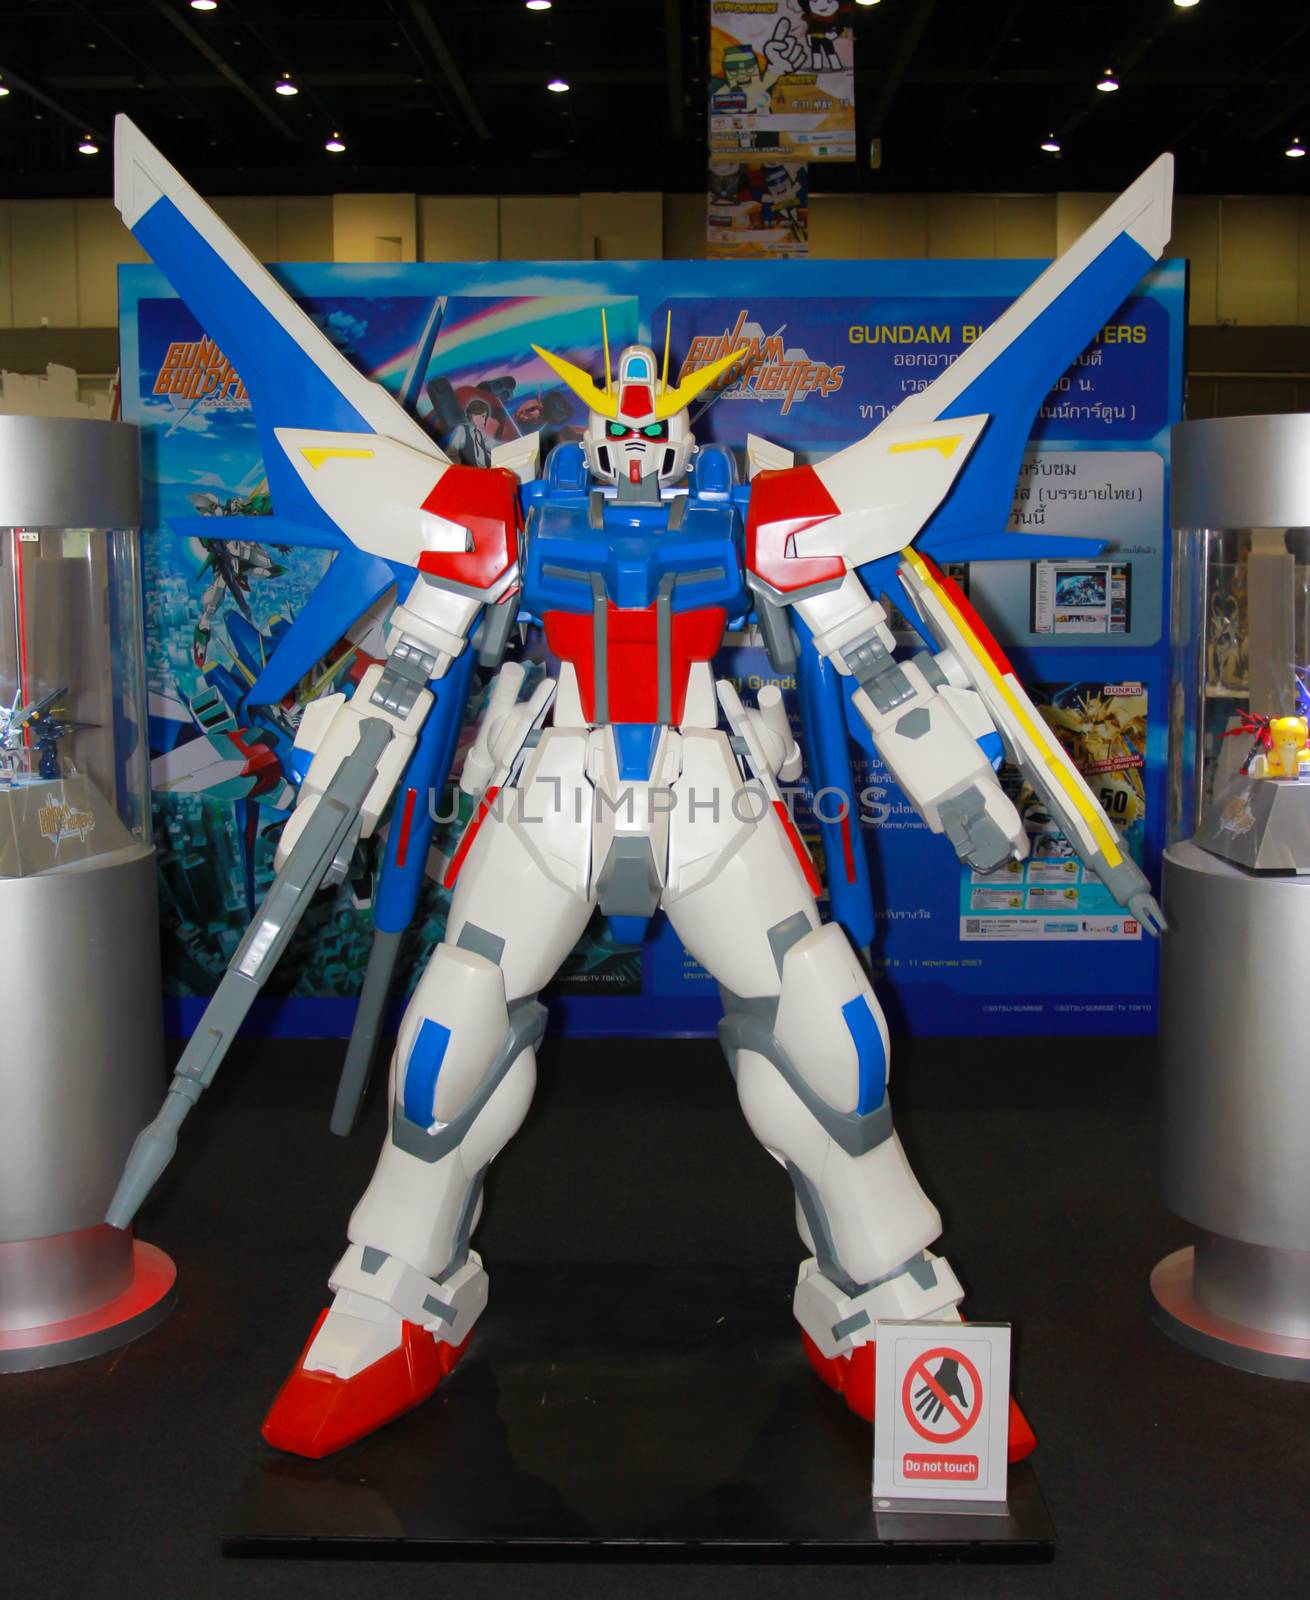 A model of the character Gundam from the movies and comics 2 by redthirteen